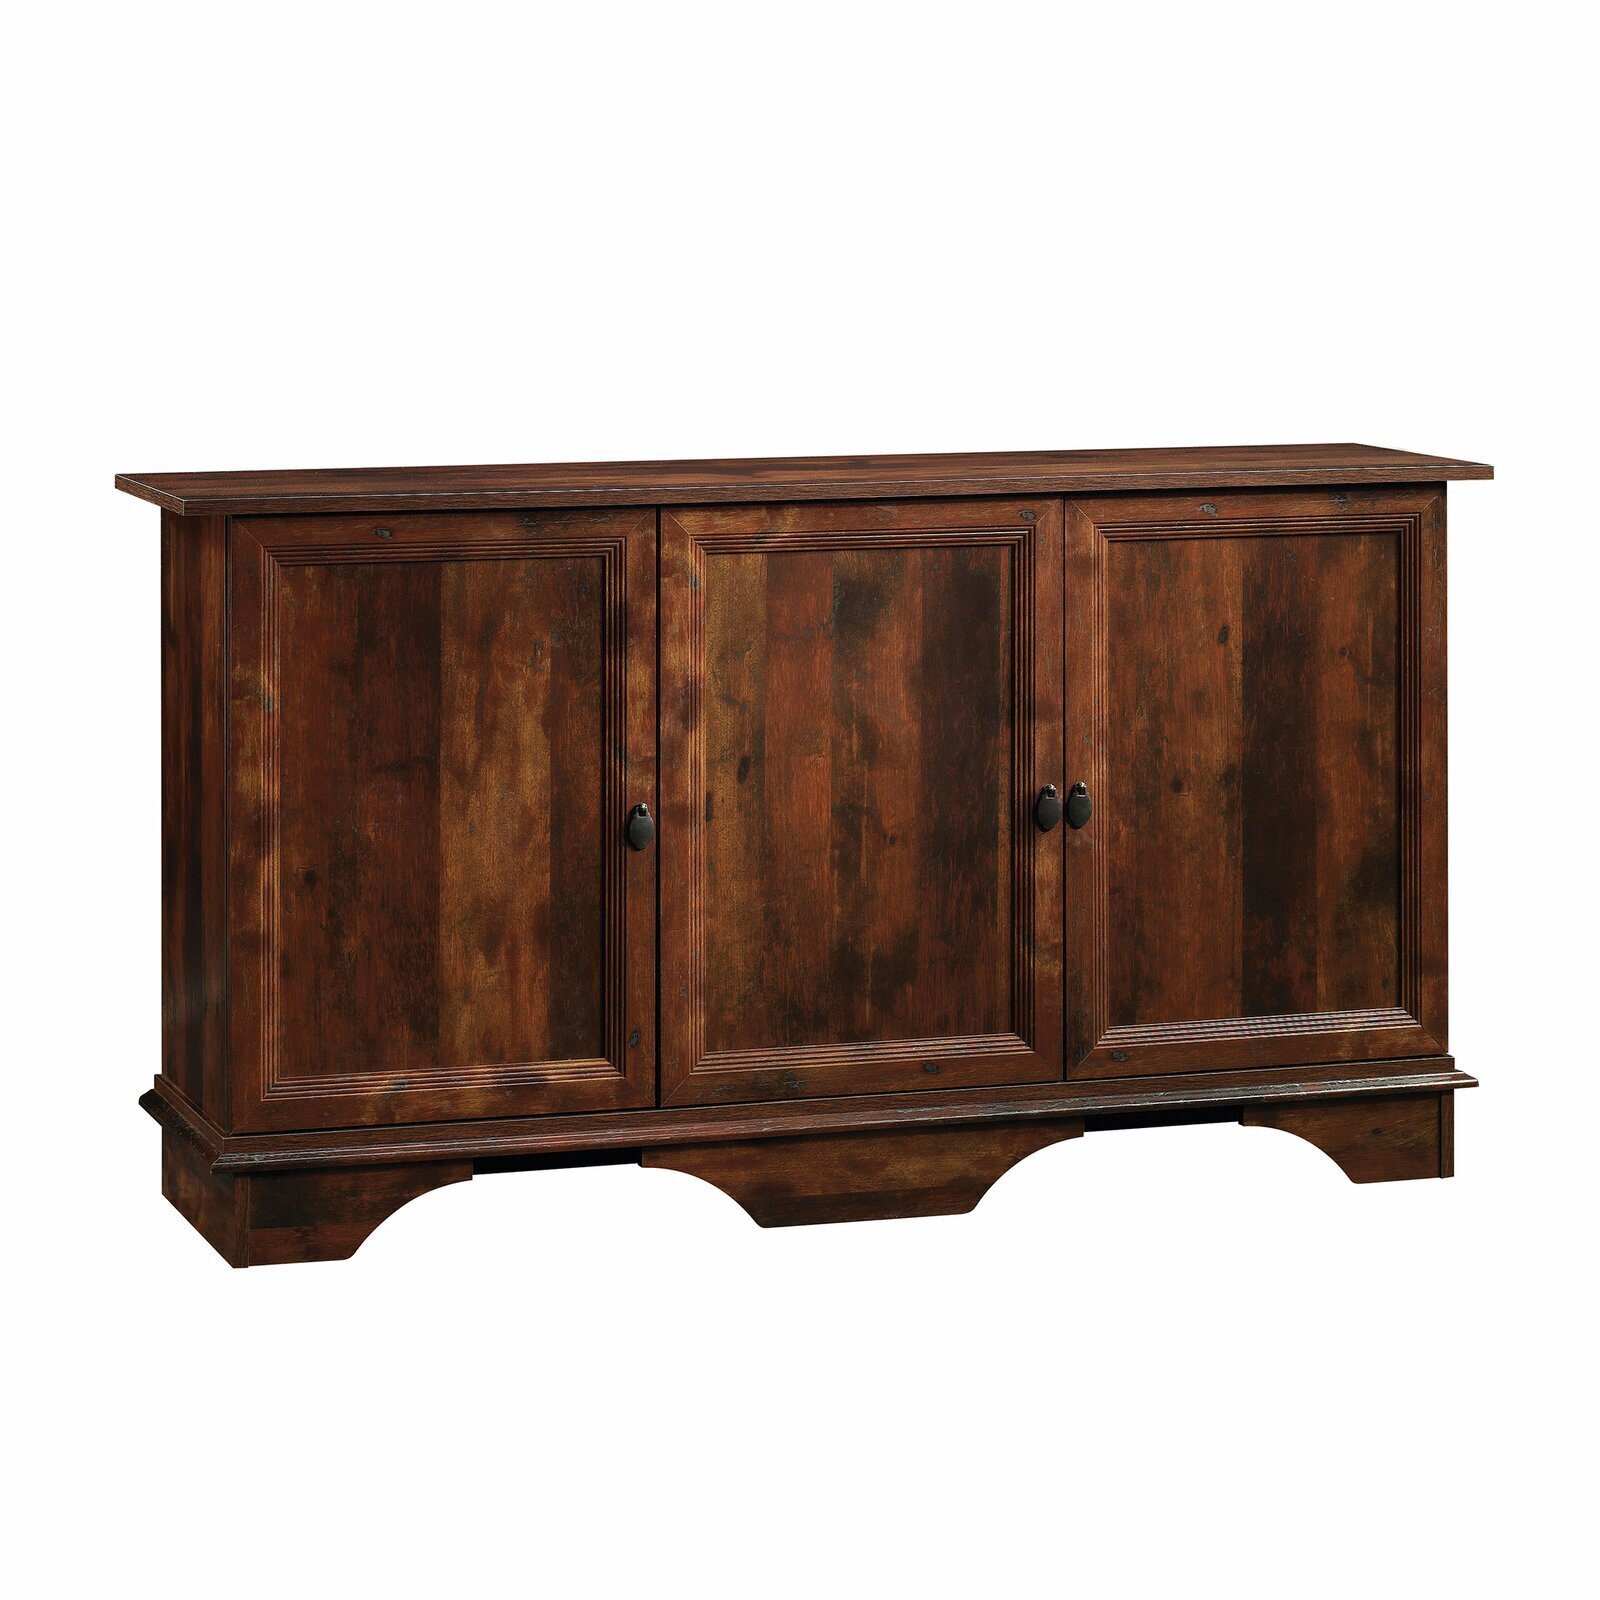 Antique sideboard buffet in a simple design